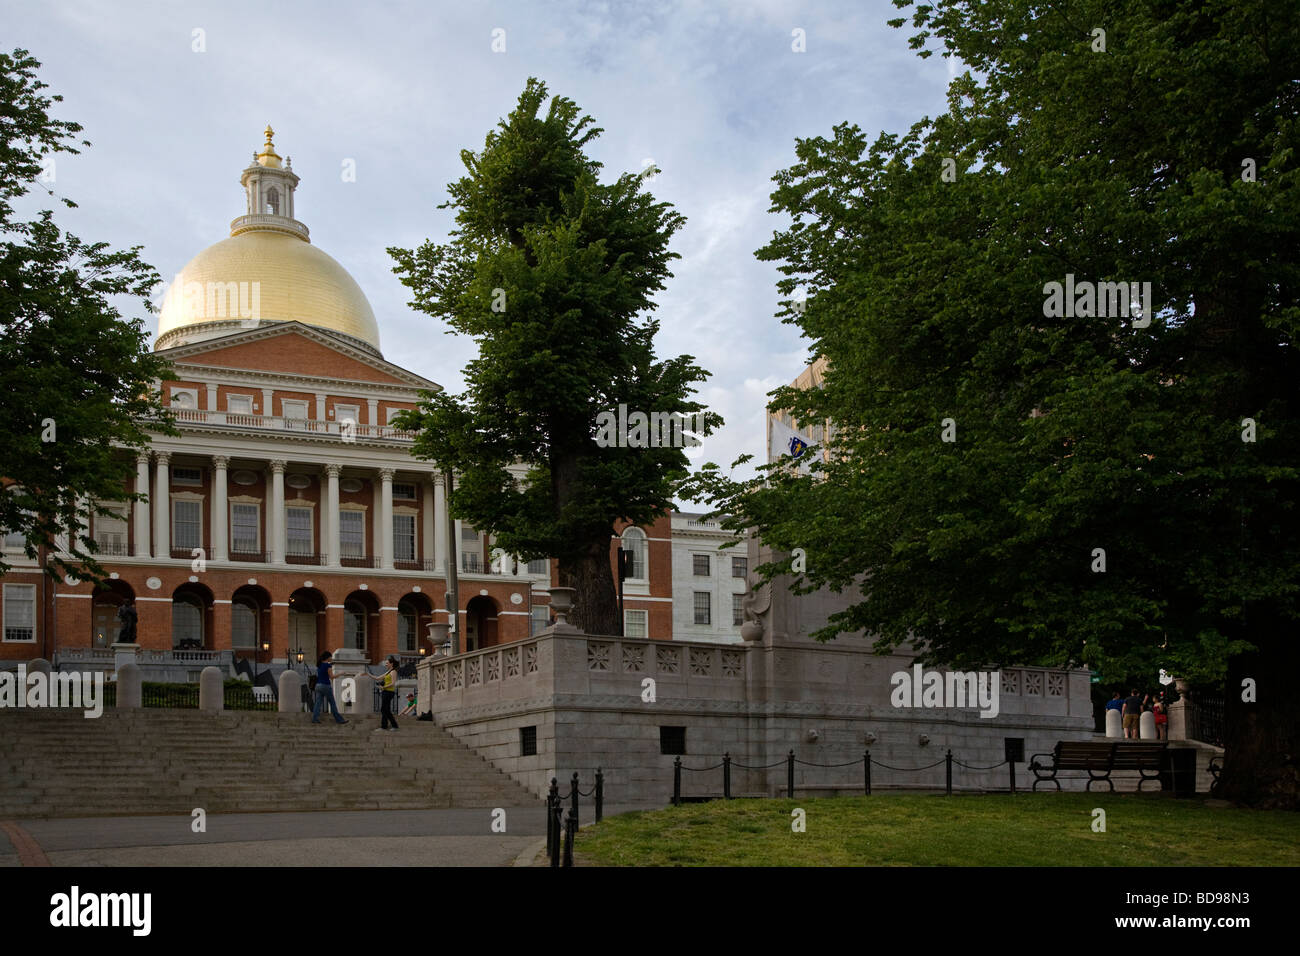 Located on BEACON HILL the MASSACHUSETTS STATE HOUSE contains the legestlature and Goveners residence BOSTON MASSACHUSETTS Stock Photo